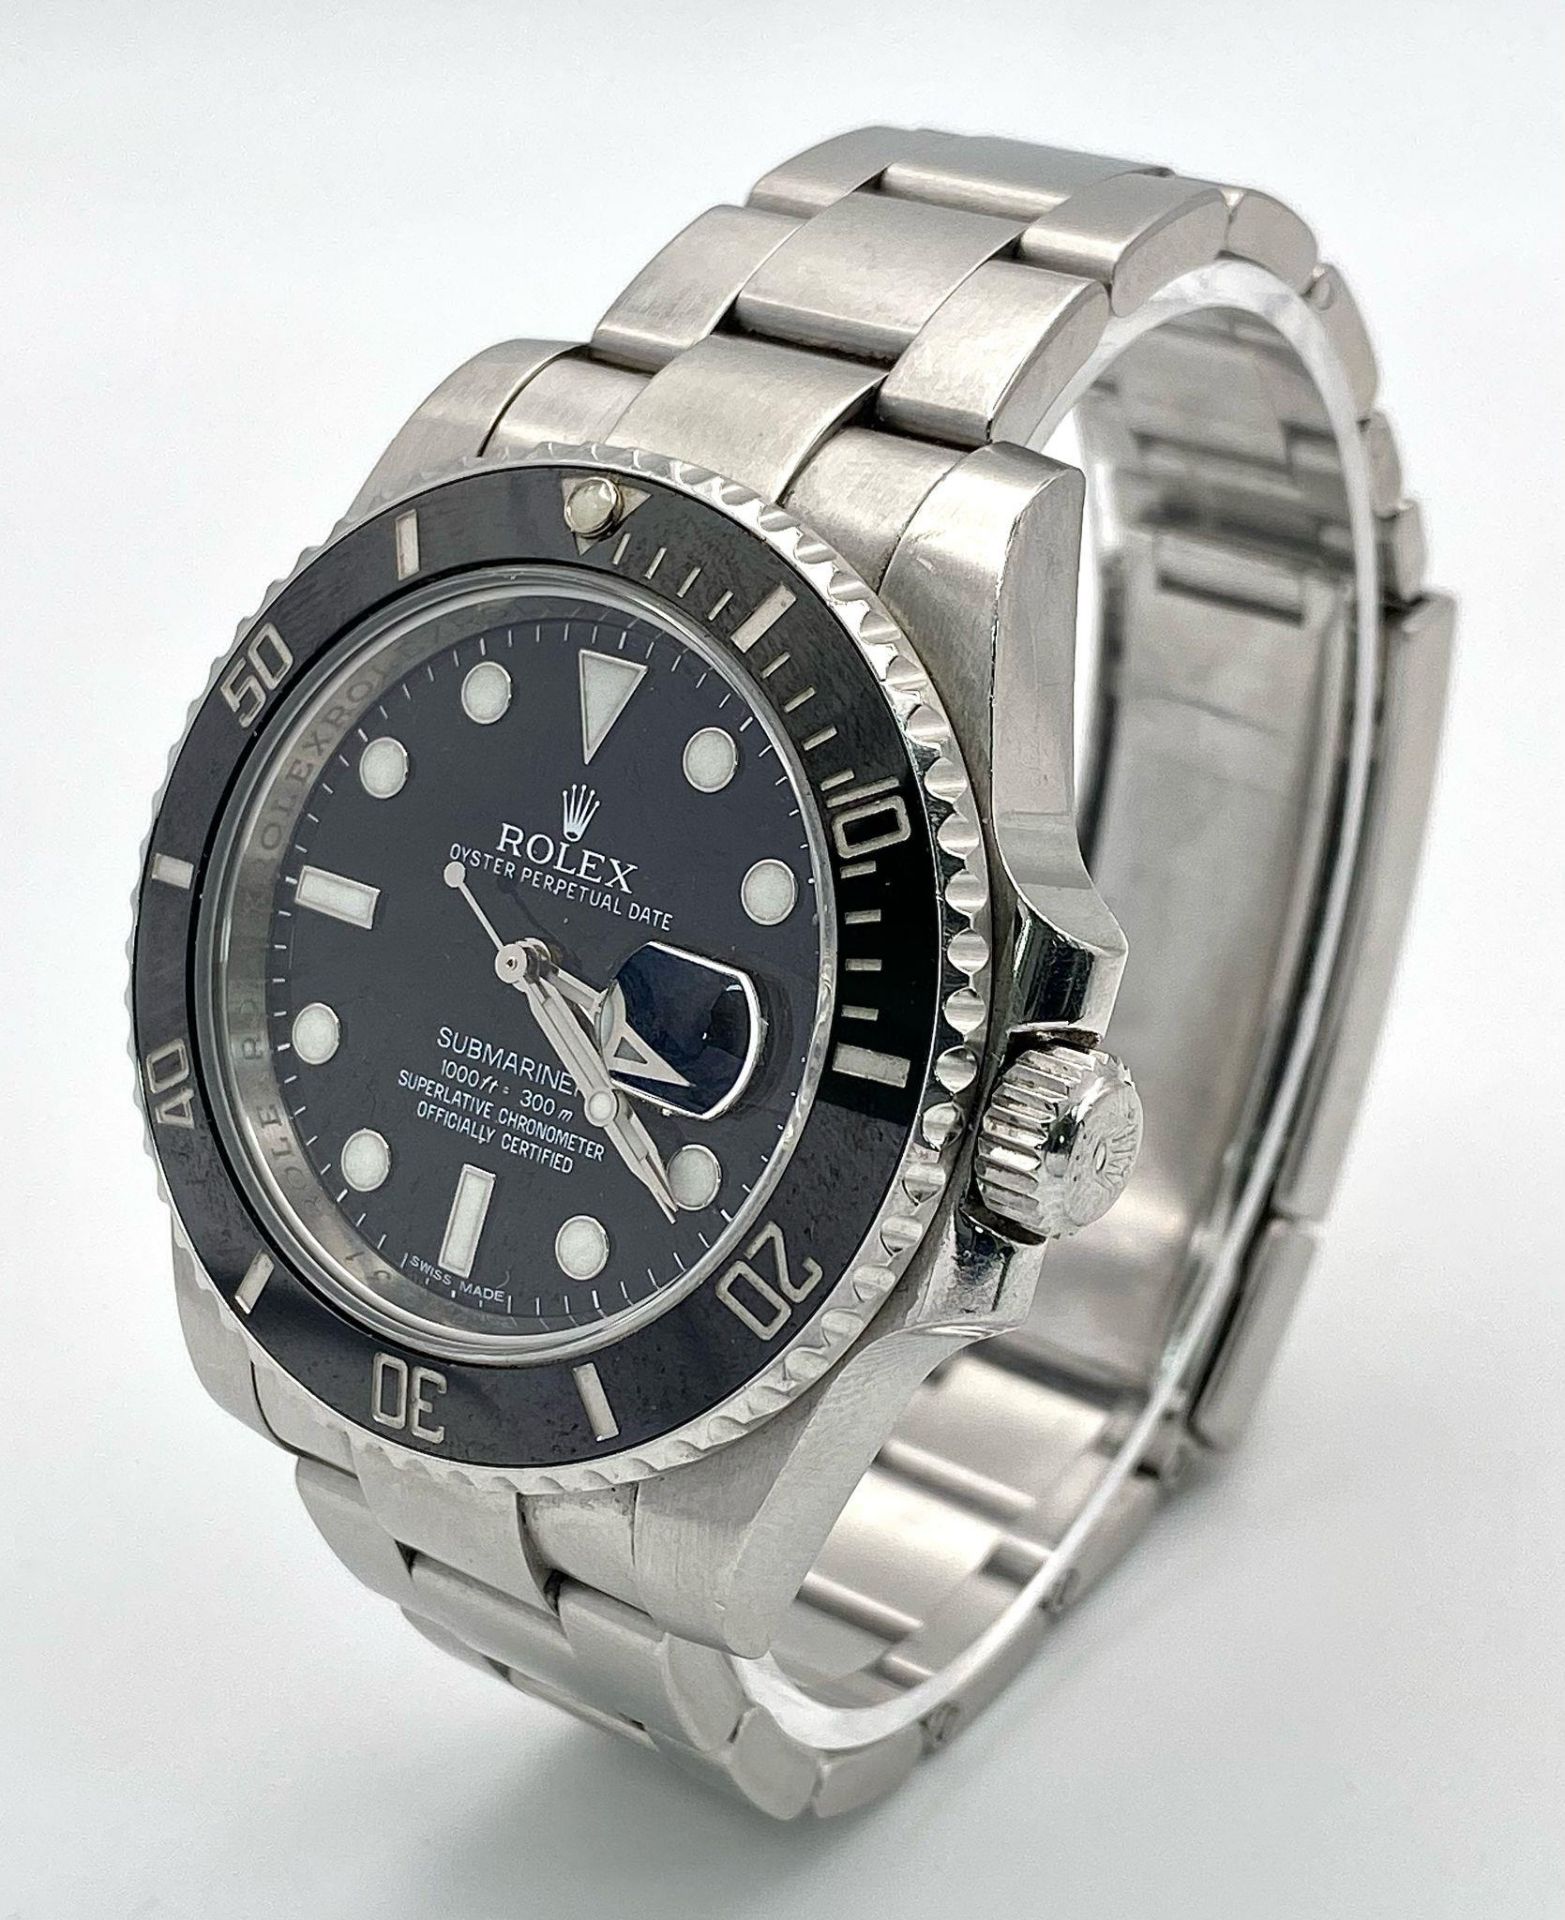 A Rolex Submariner Date Automatic Gents Watch. Stainless steel bracelet and case - 41mm. Black - Image 2 of 11